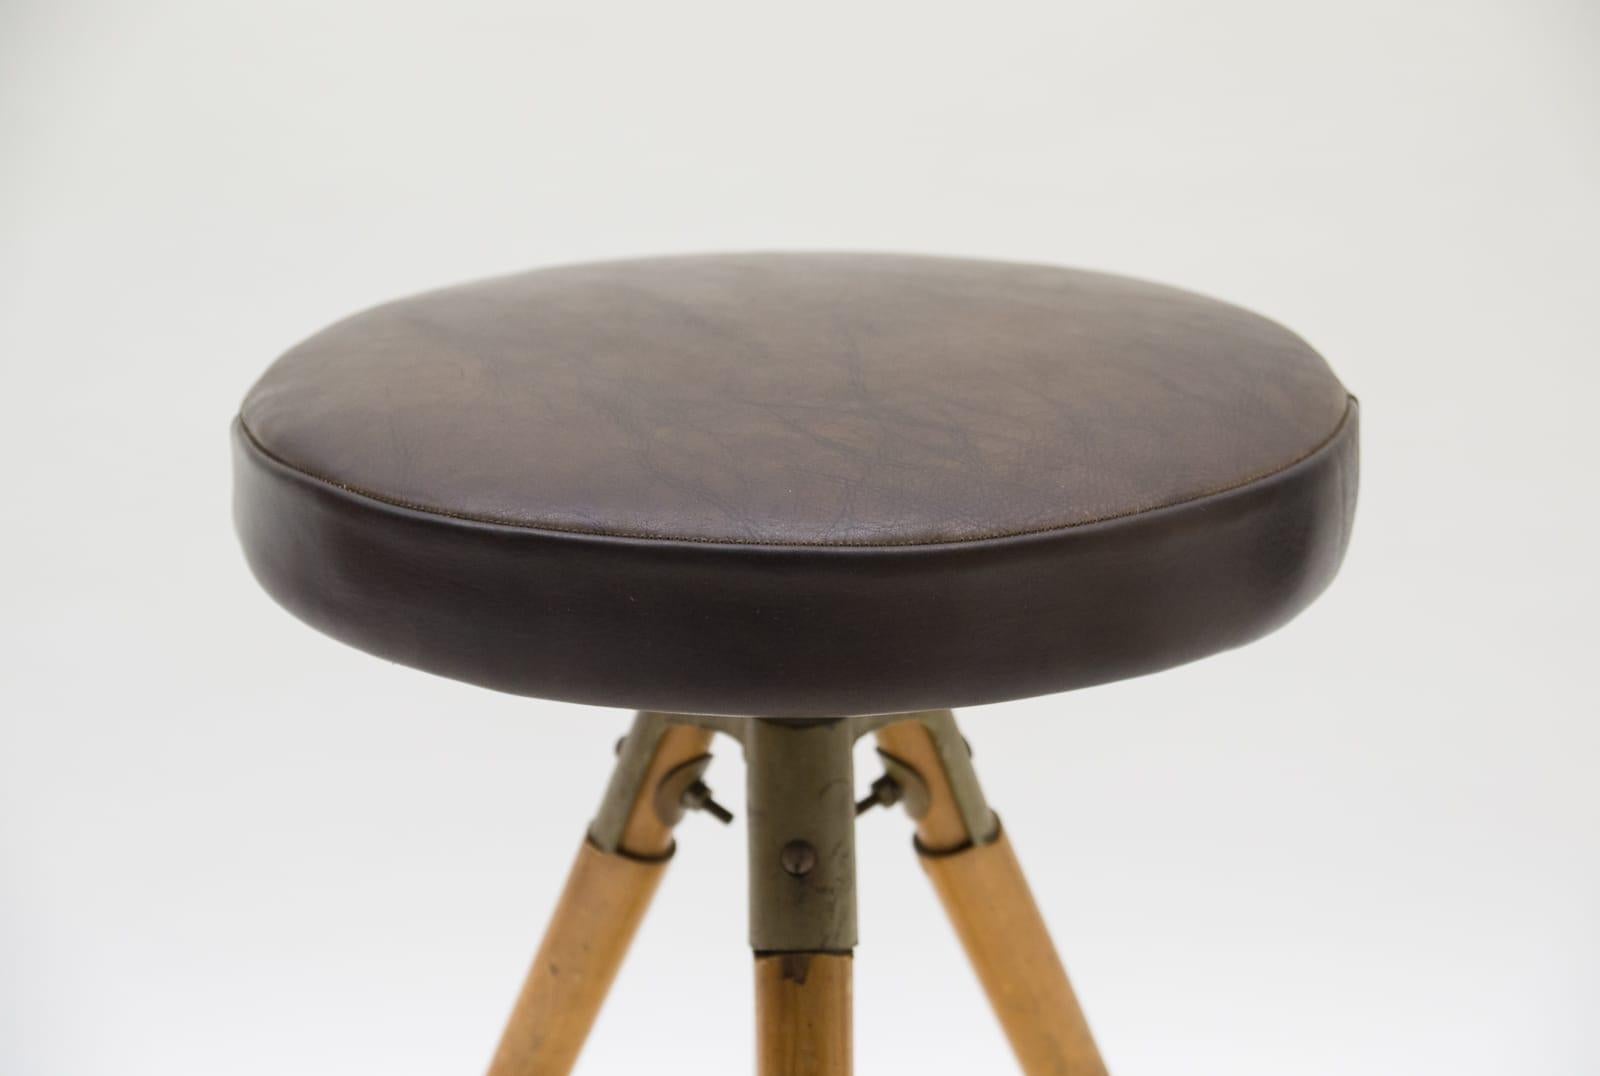 Mid-Century Modern Adjustable Swiss Stool in Leather Metal and Wood, 1940s/50s For Sale 1